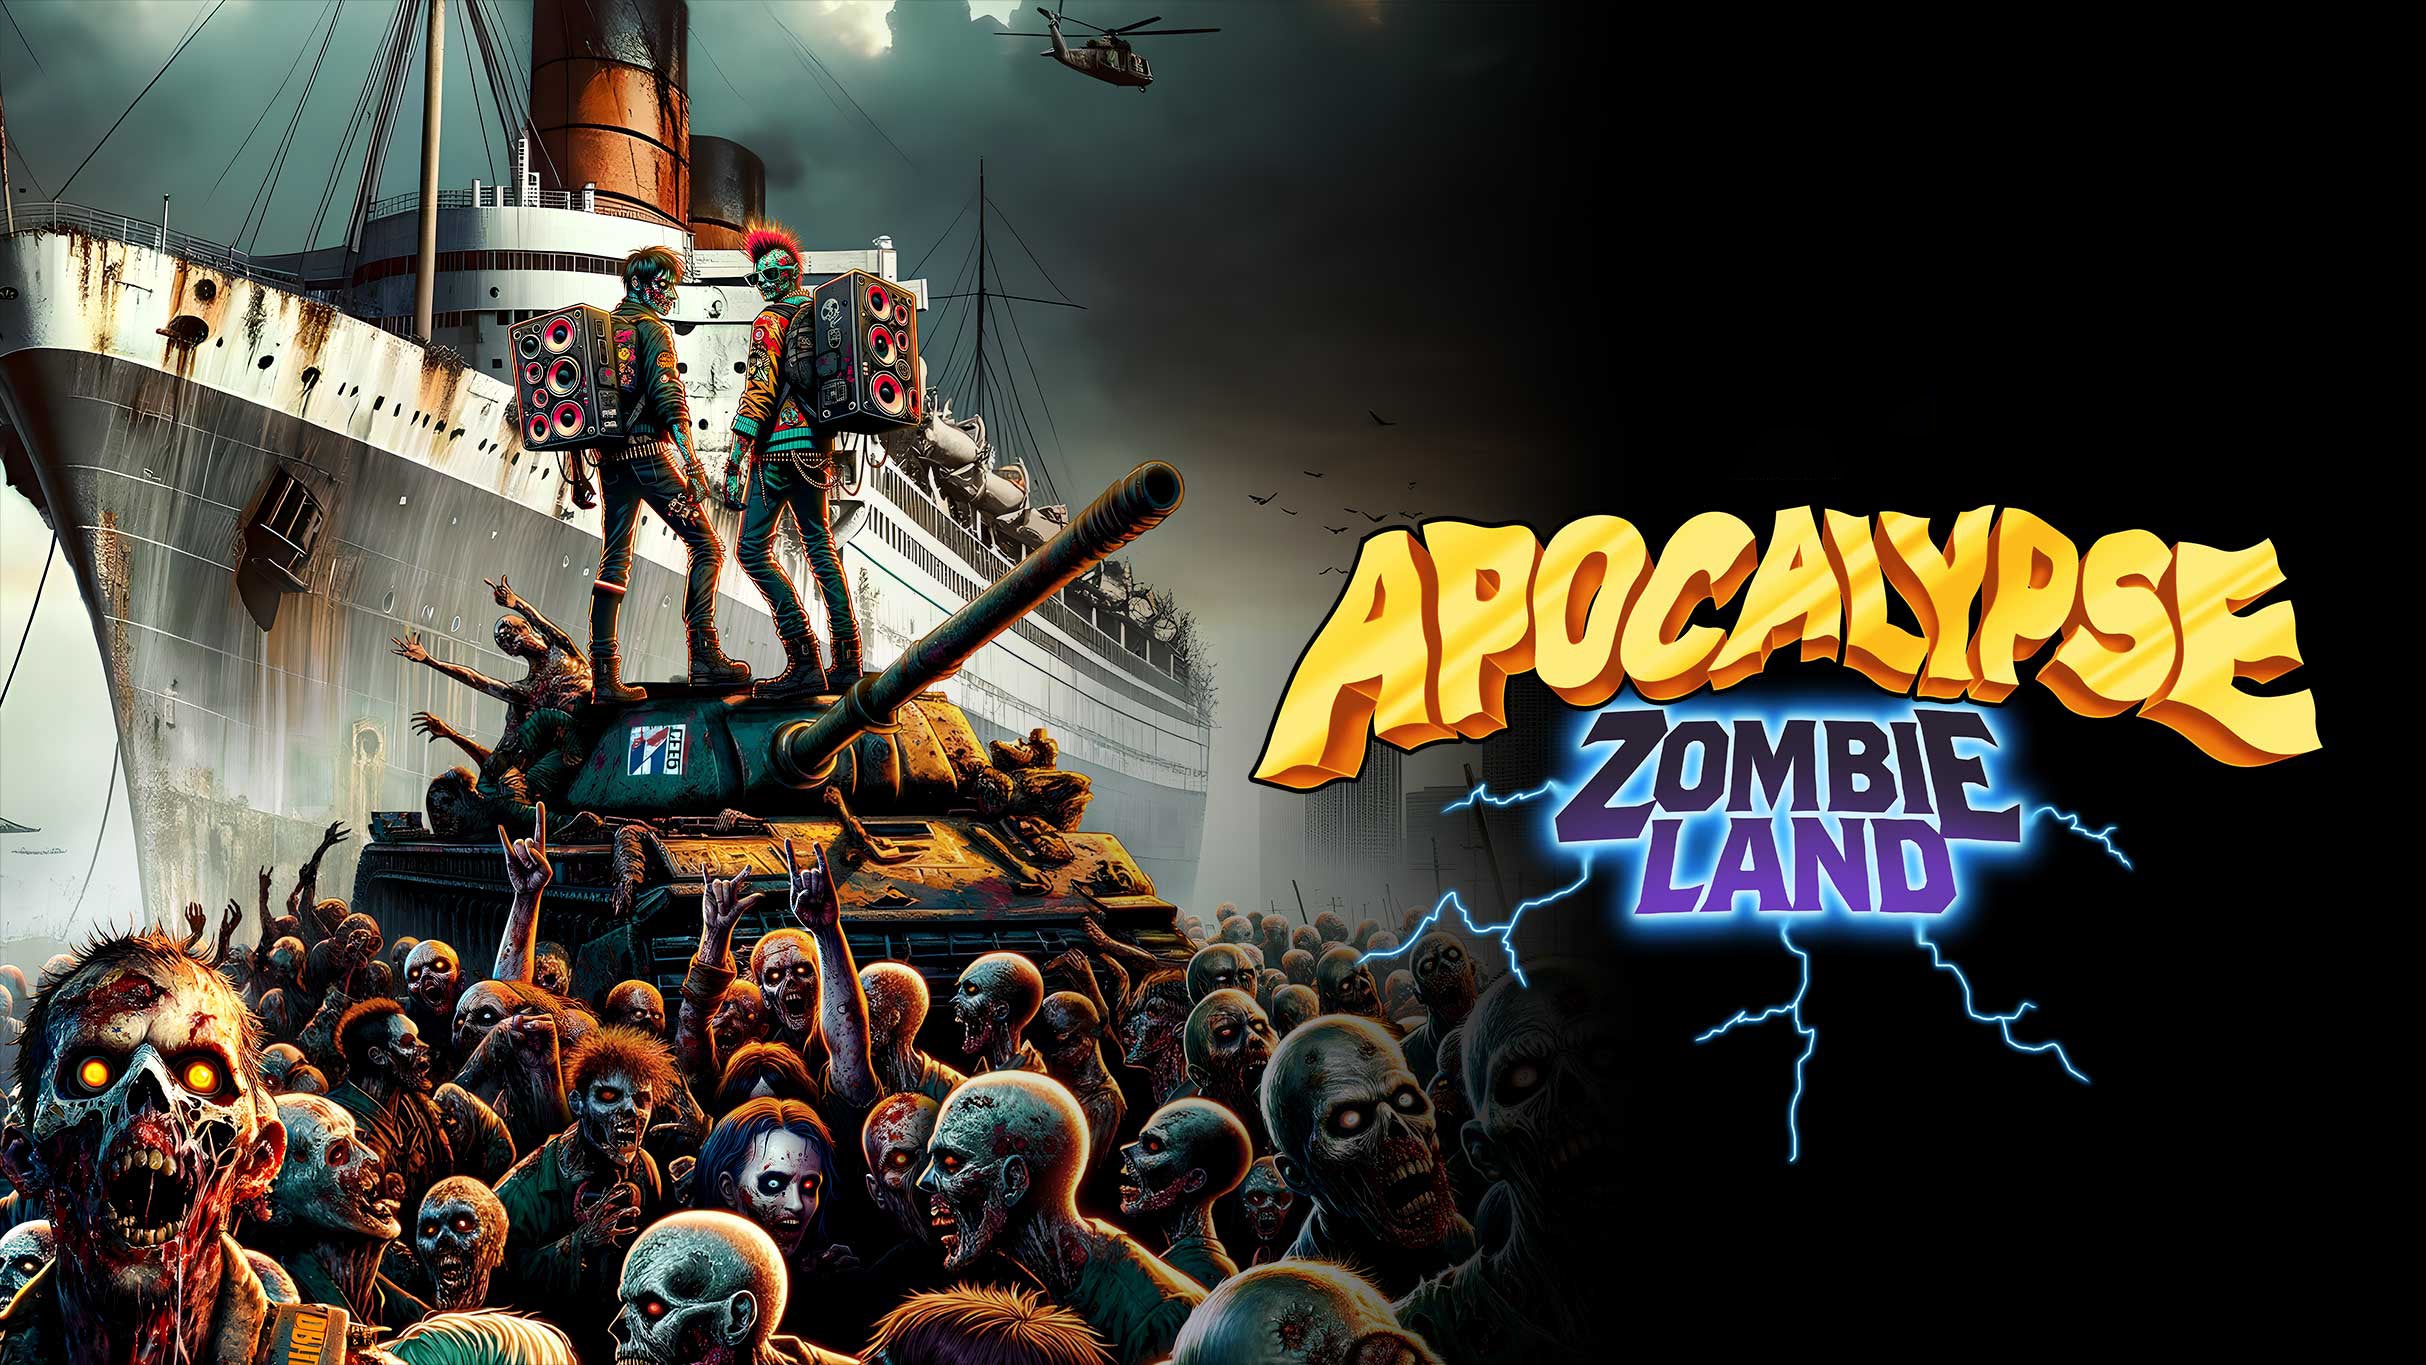 Apocalypse Zombie Land at The Queen Mary